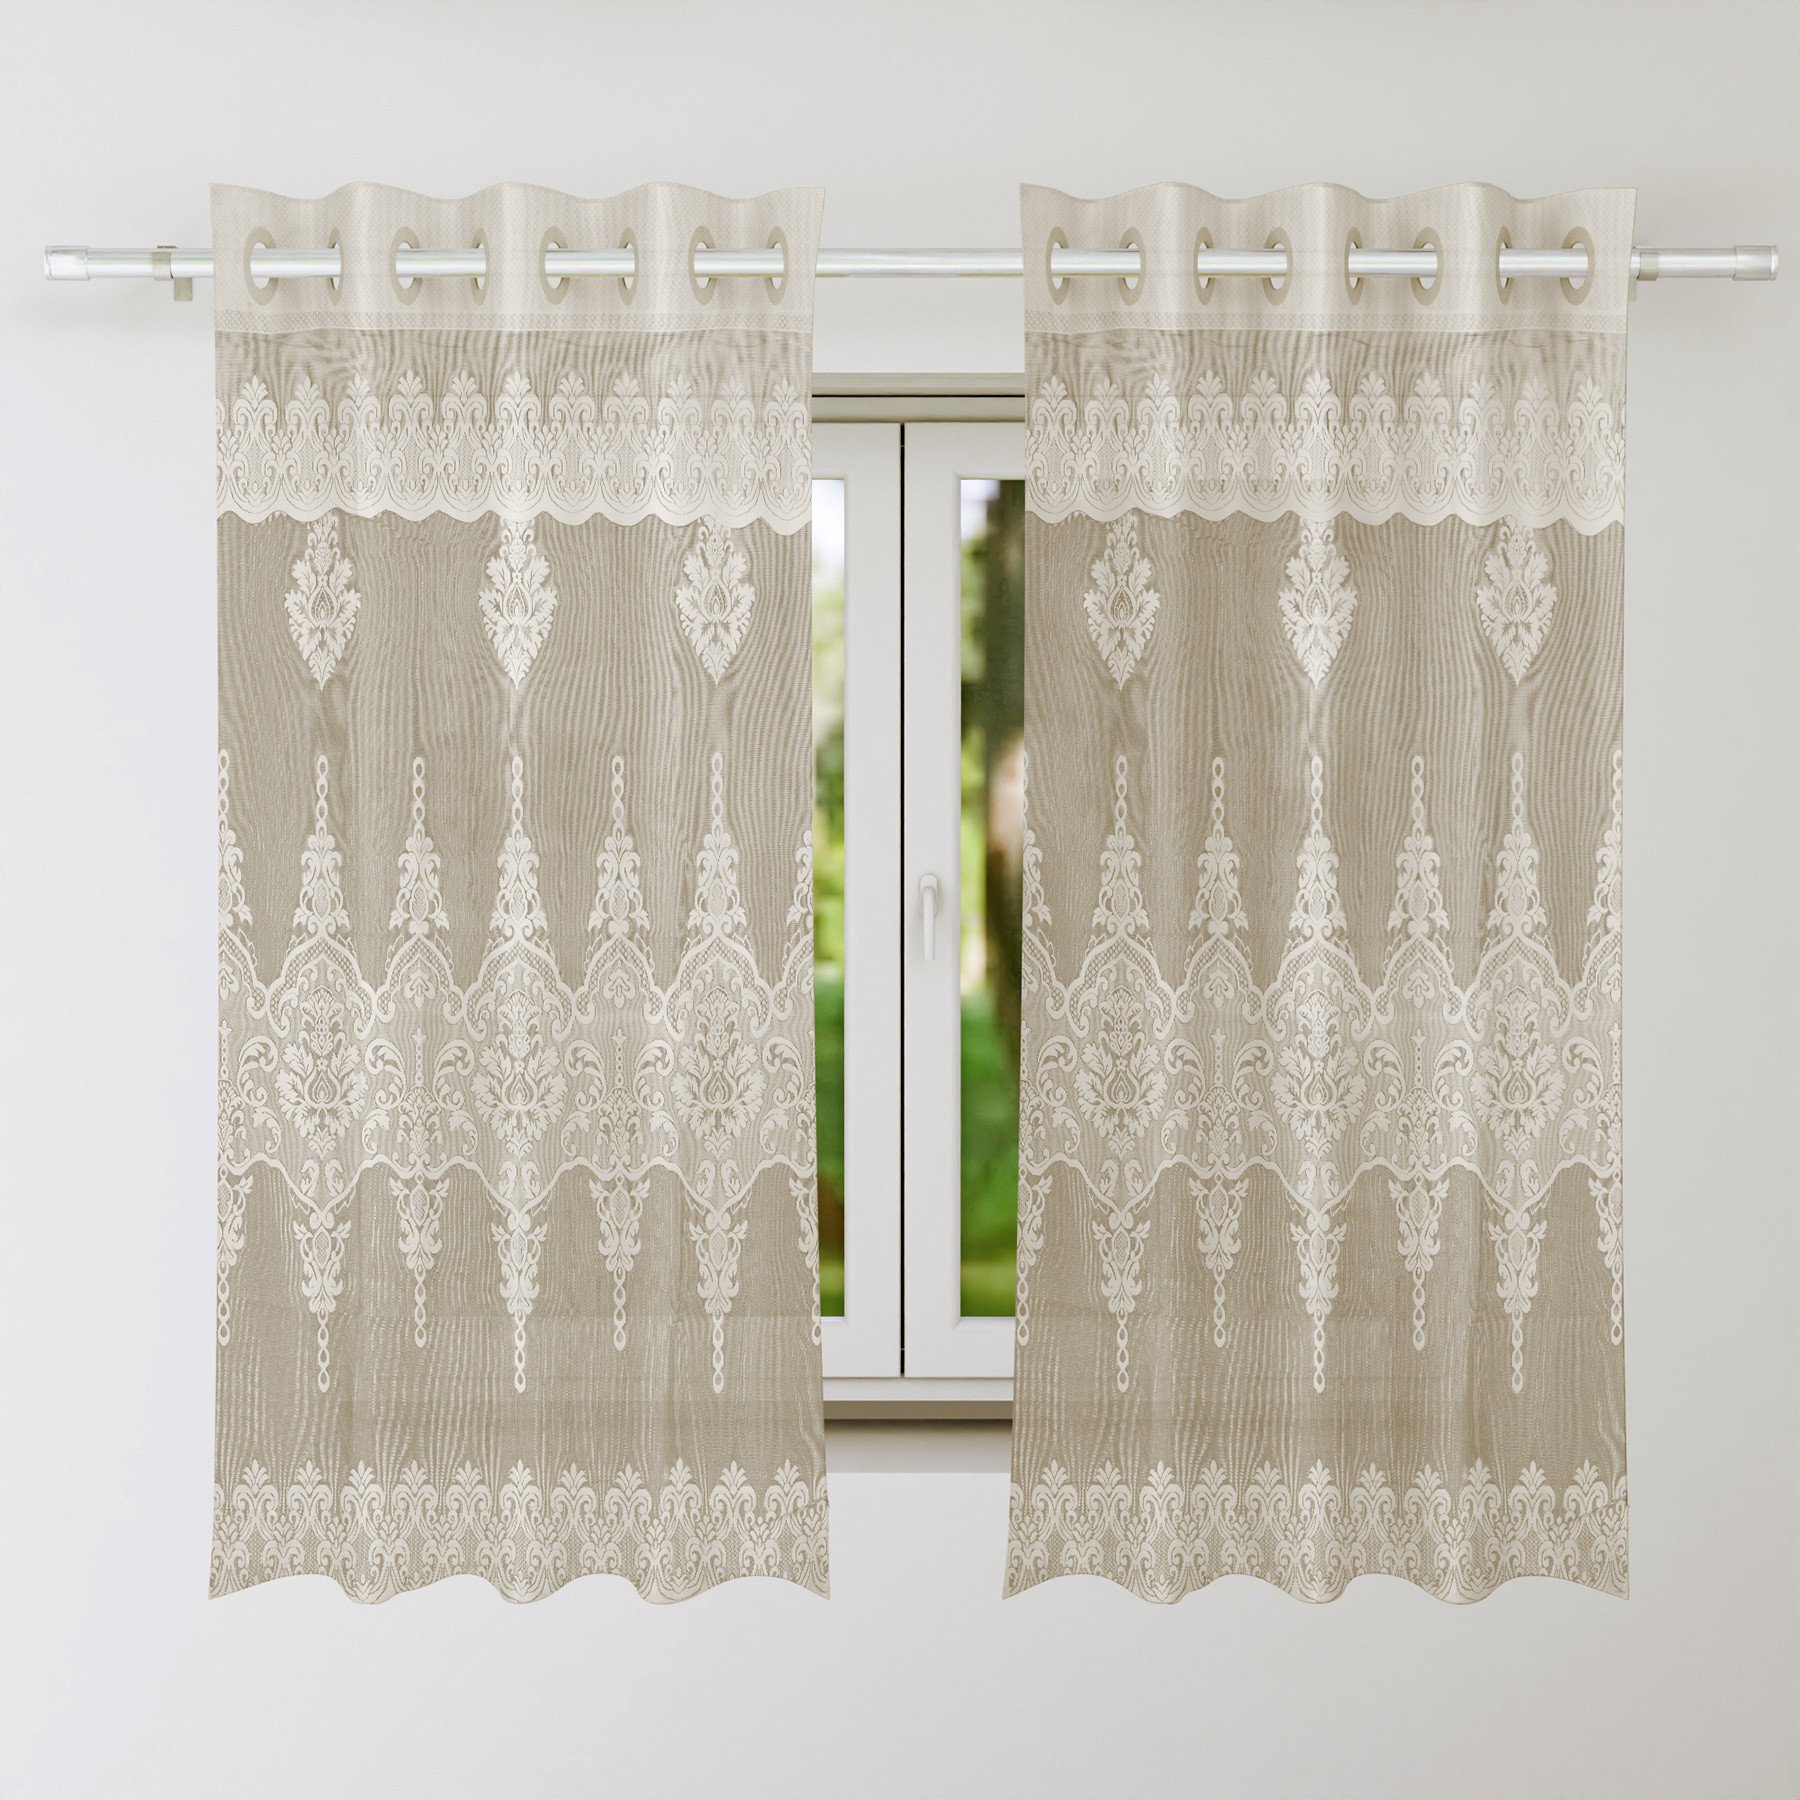 Kuber Industries Window Curtain | Darkening Window Curtains | Sheer Curtain with 8 Rings | Parda for Living Room | Drapes for Bedroom | Net Frill Window Curtain | 5 Ft | SY15ZZ | Cream